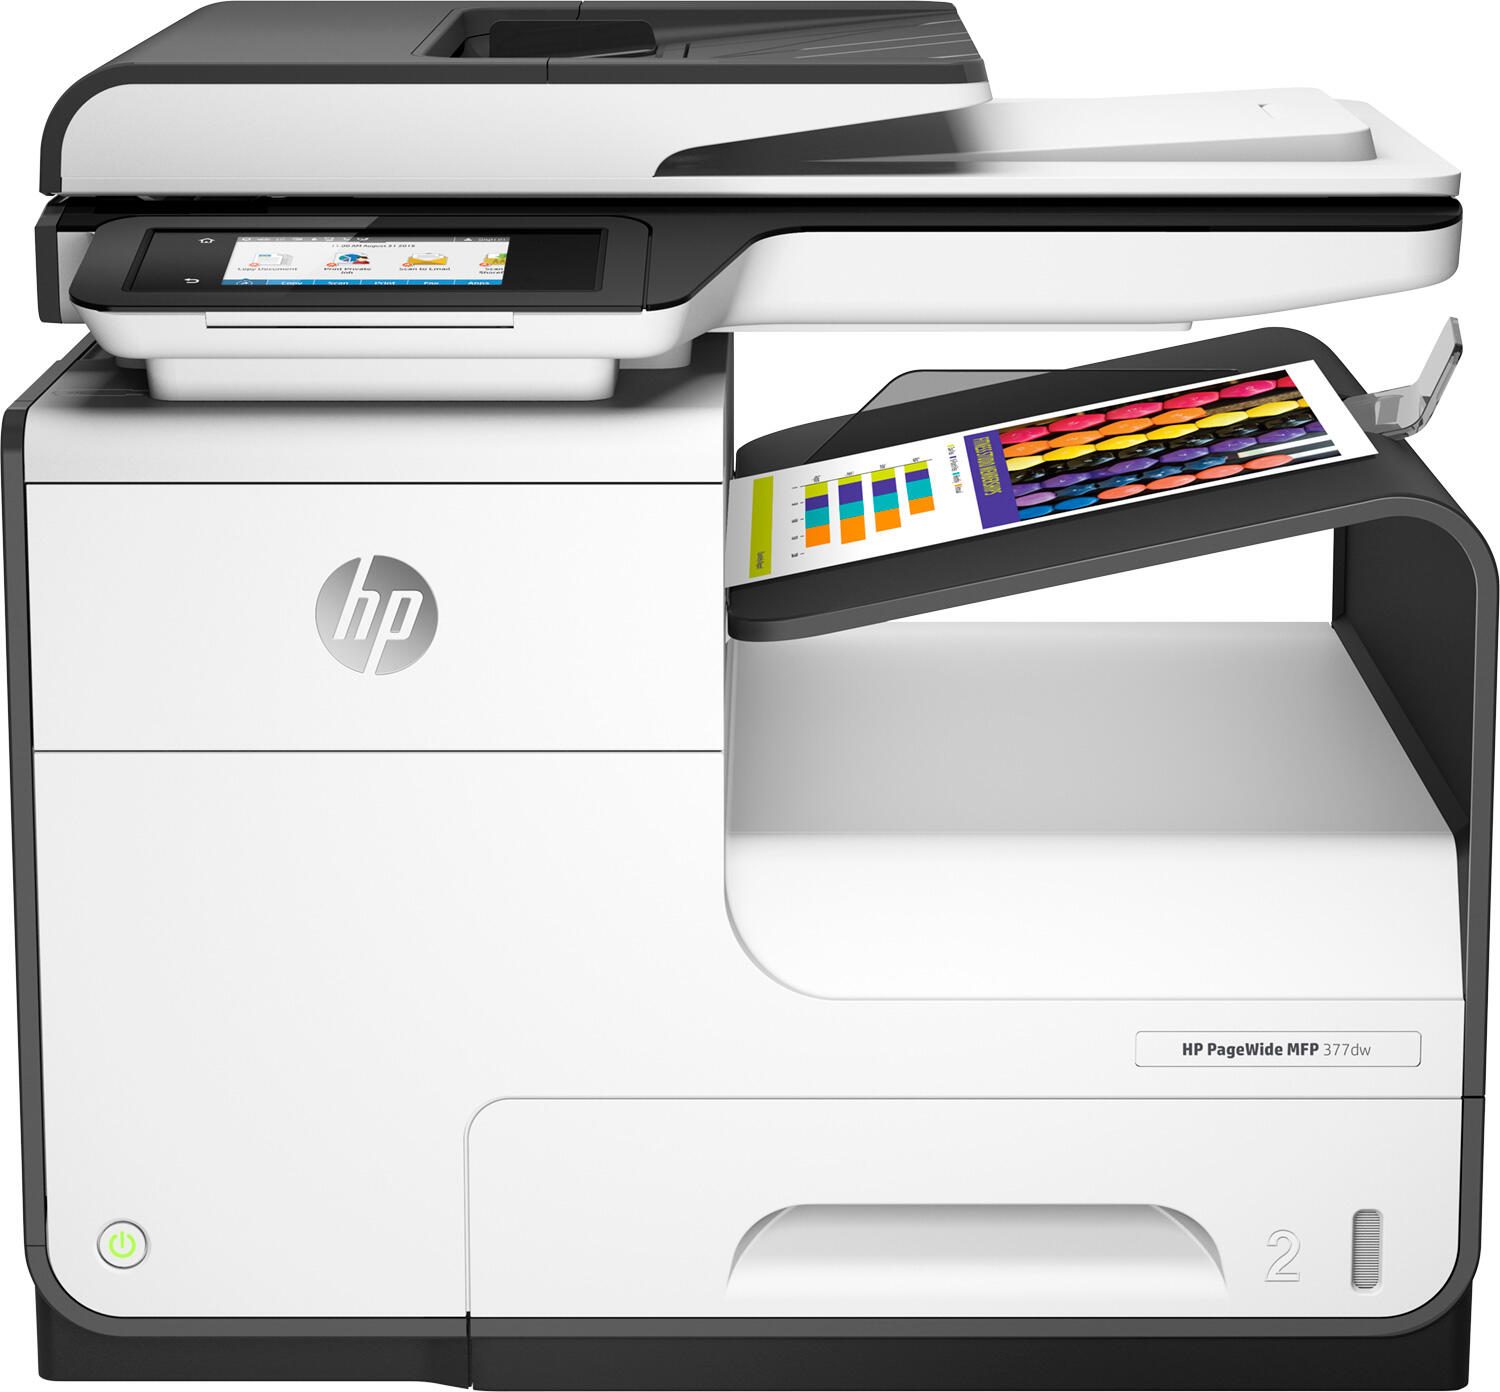 HP PageWide MFP 377 dw